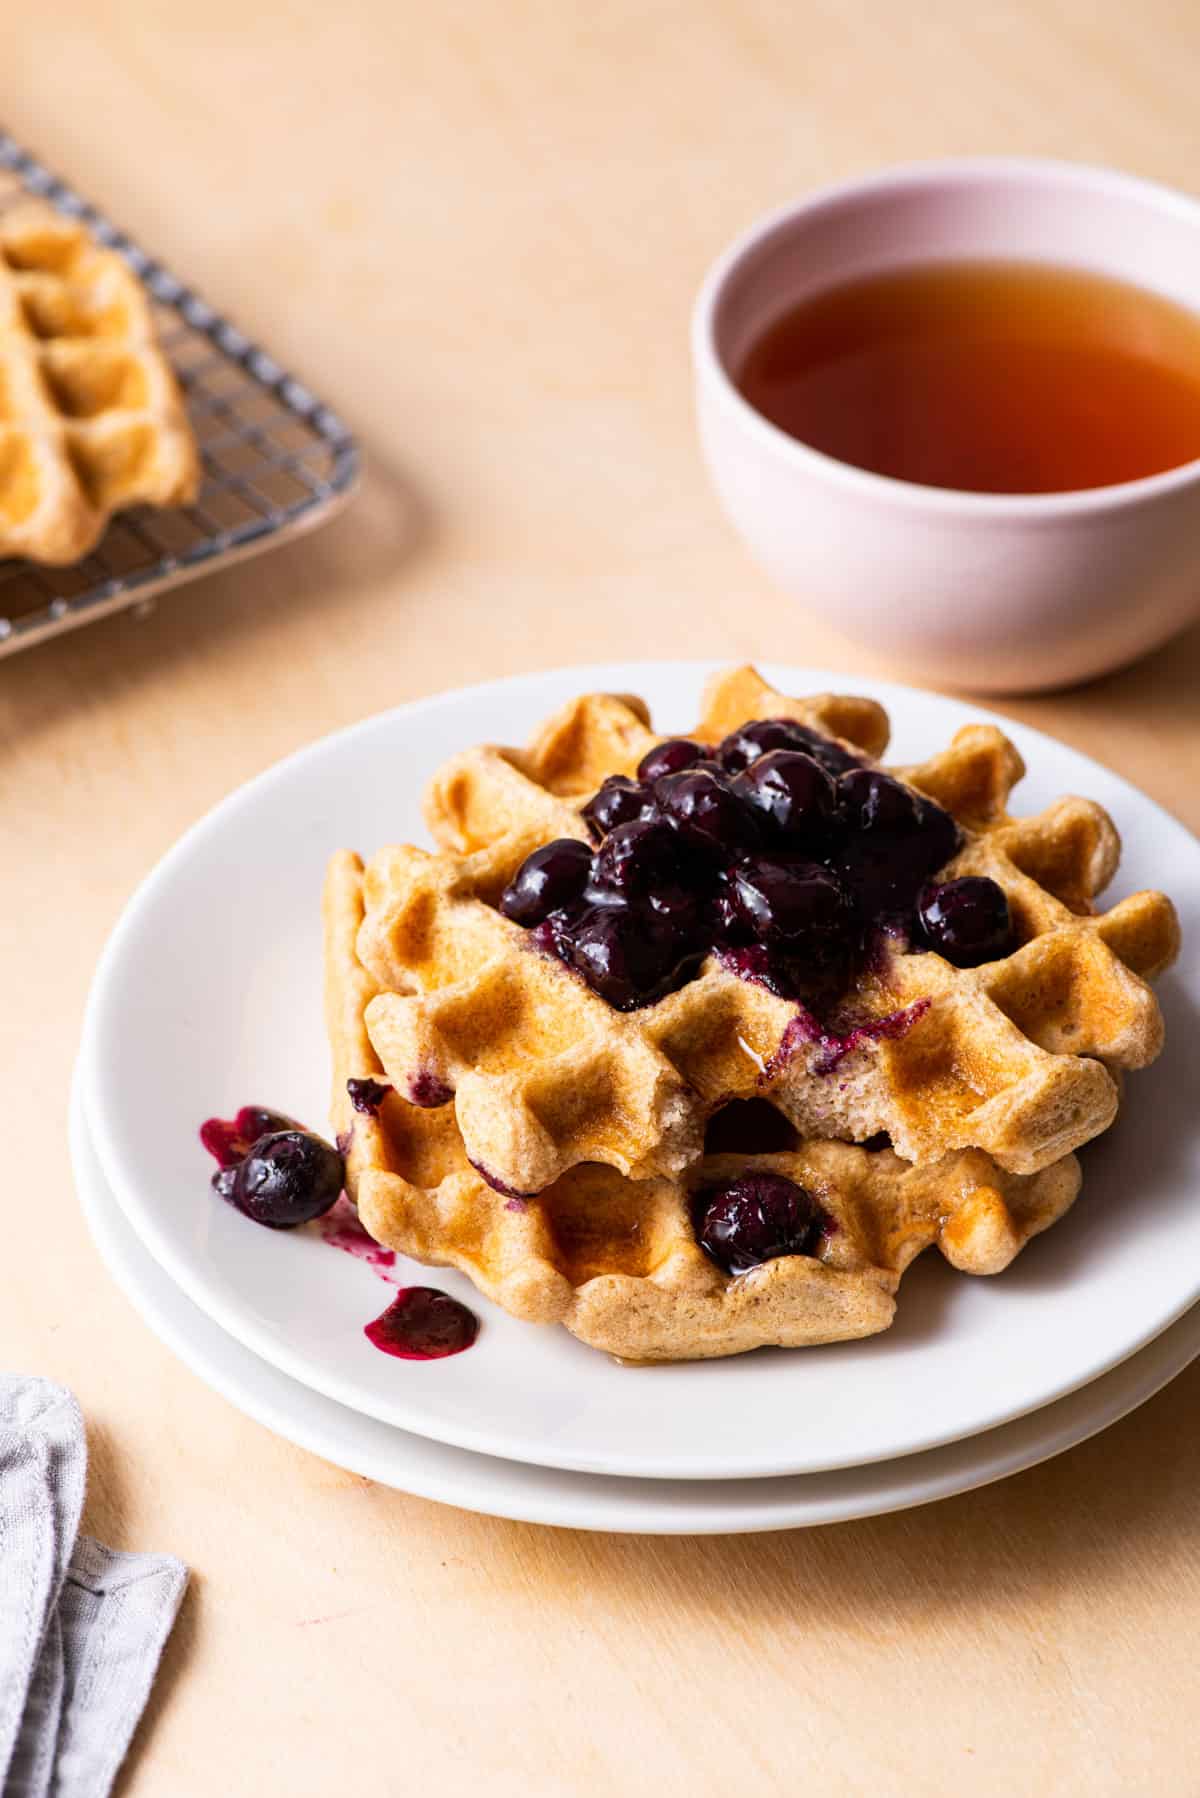 Vegan oat waffles on a white plate with blueberry compote, next to teacup.